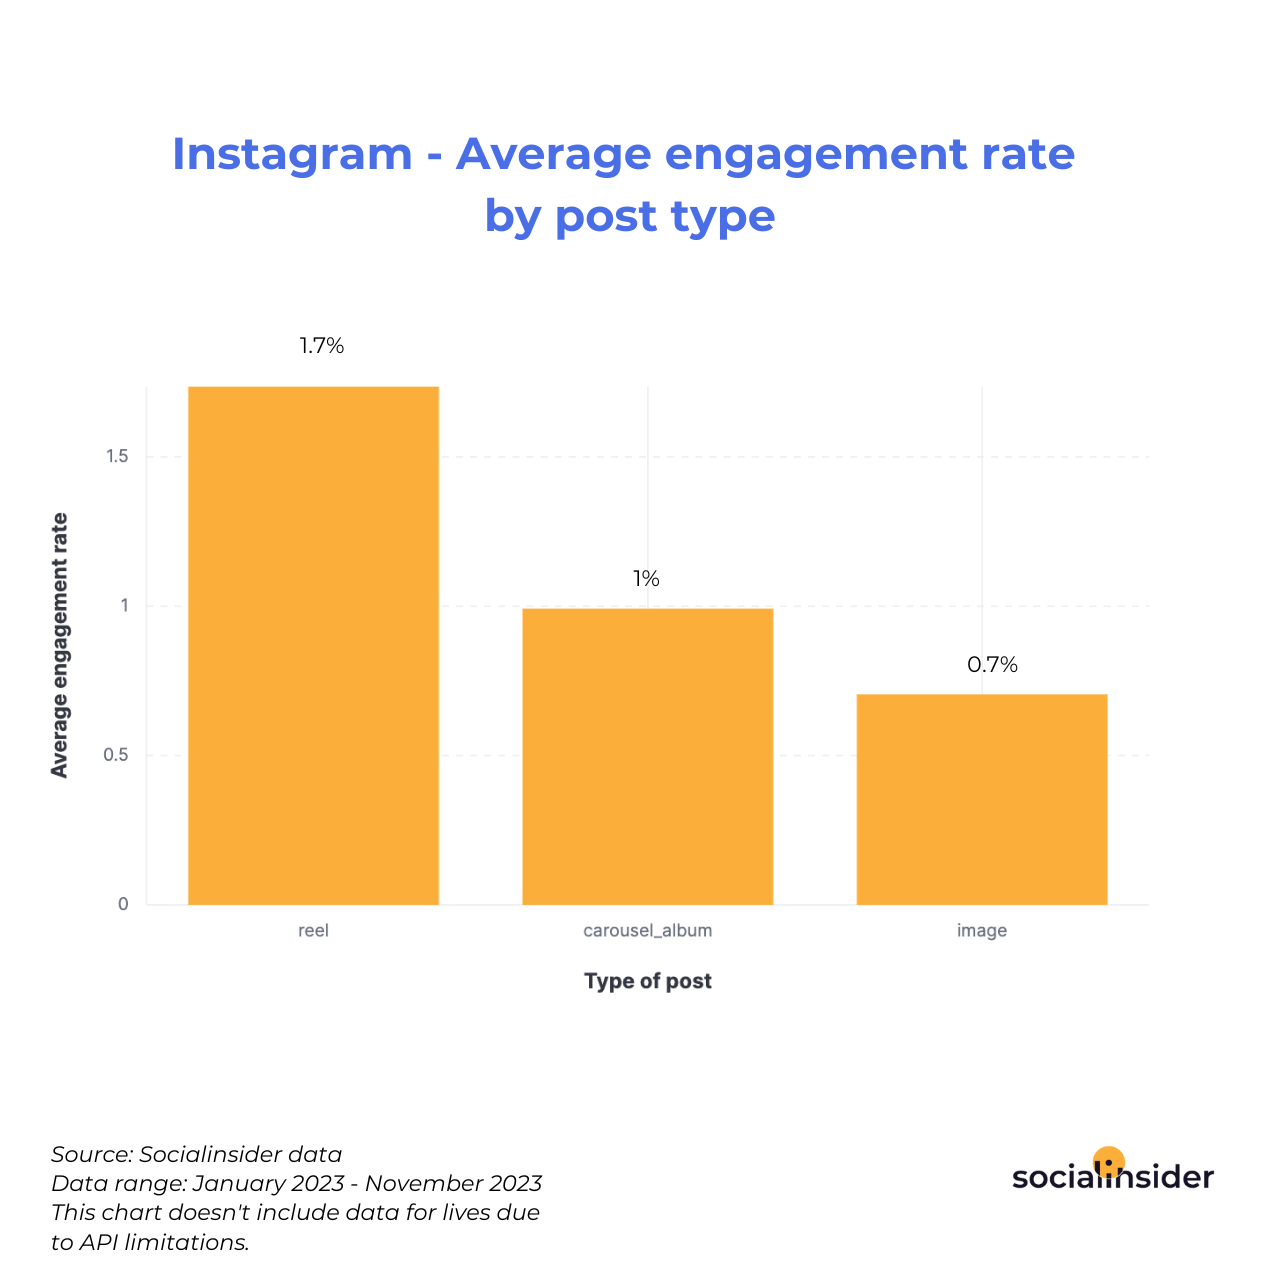 Instagram - Average engagement rate by post type